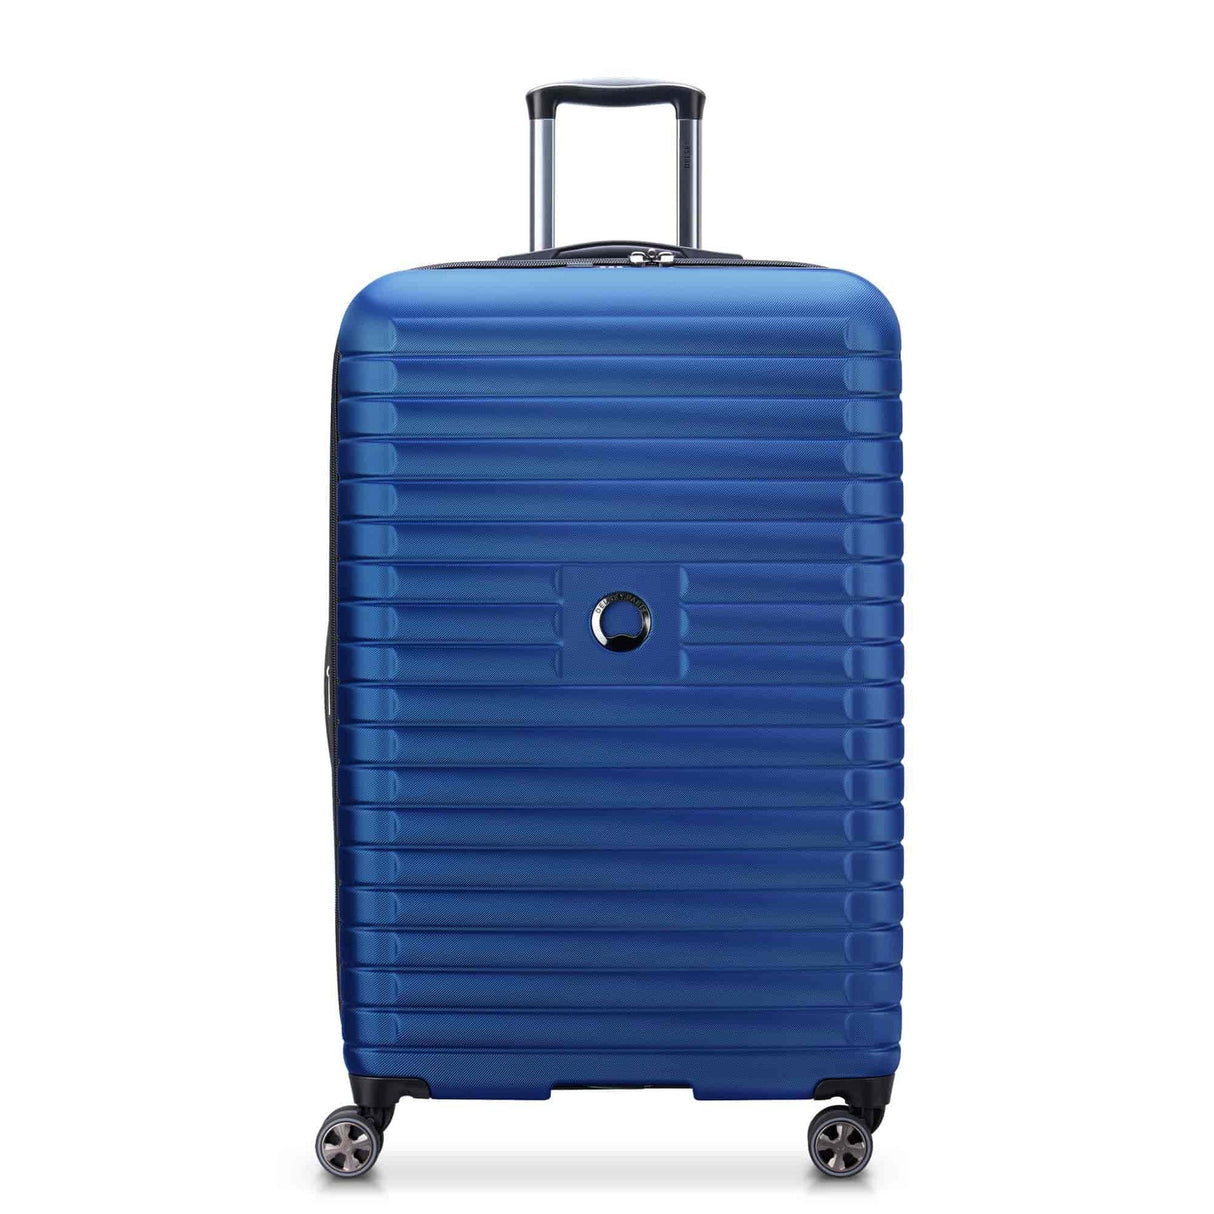 Delsey Cruise 3.0 Large Checked Expandable Spinner , Blue , 11-delsey-cruise-30-40287983002-01_1800x1800_7796a956-f8b3-4954-ba52-57cec8f5d584